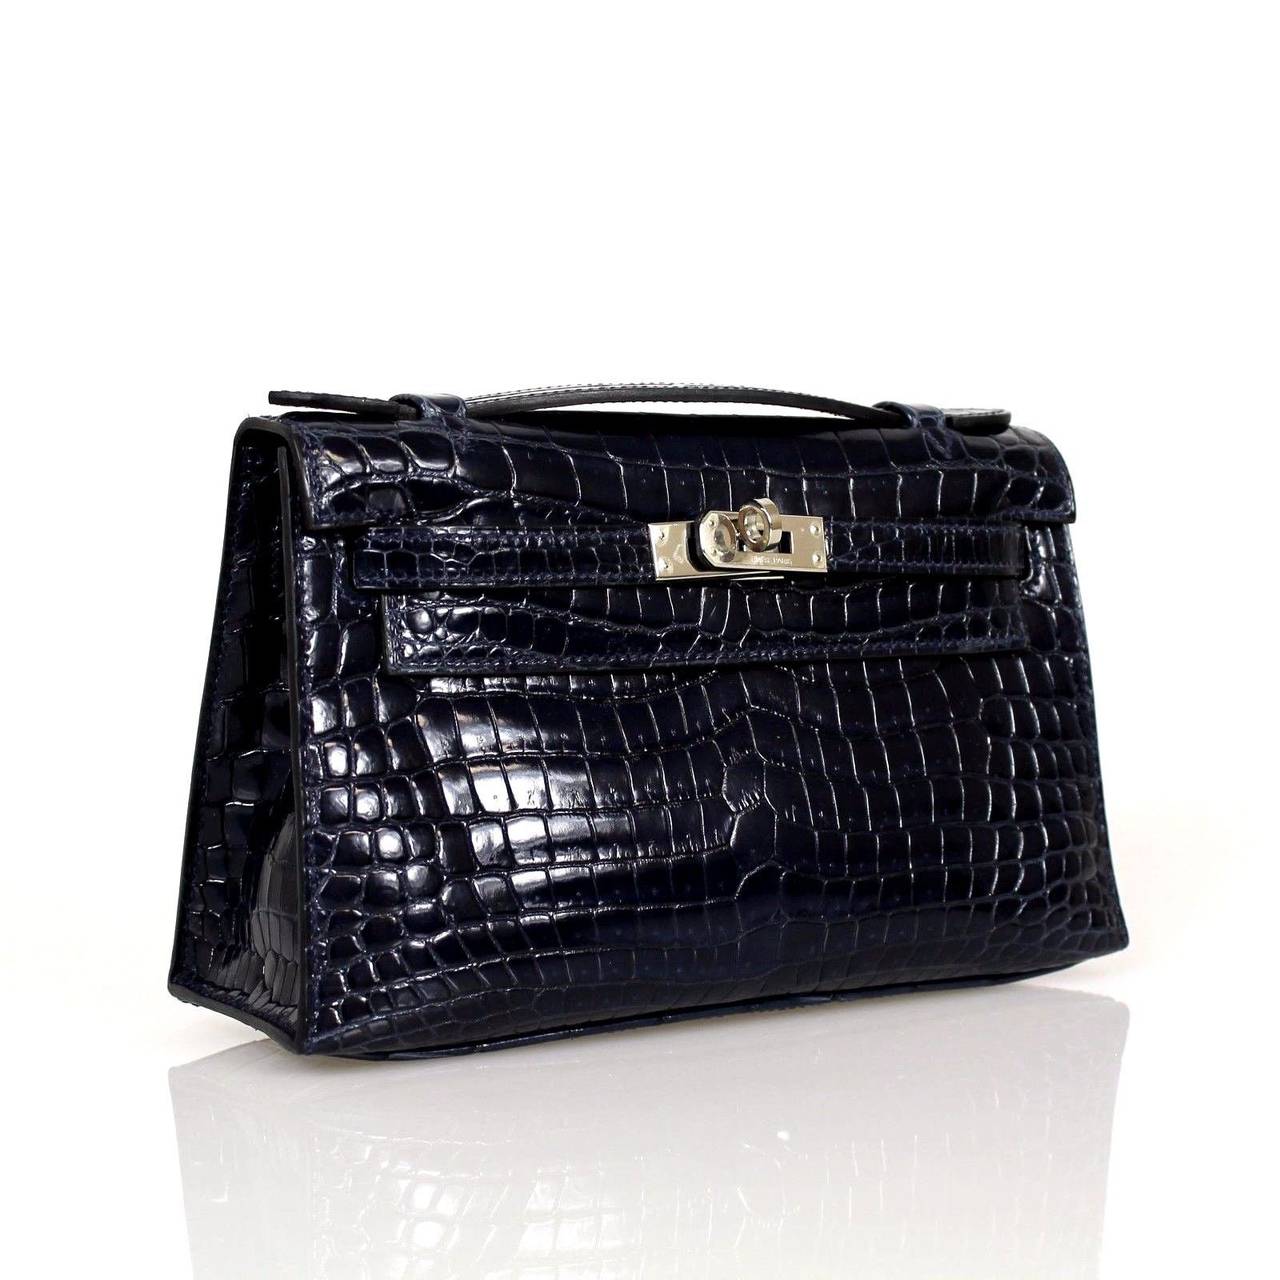 This Pochette features a little top handle. This item in navy Crocodile is  accentuated with palladium hardware. This color is very sophisticated and easy to wear. This easily carried day or night, casual to dressy. 
Stamped HERMES MADE IN PARIS on